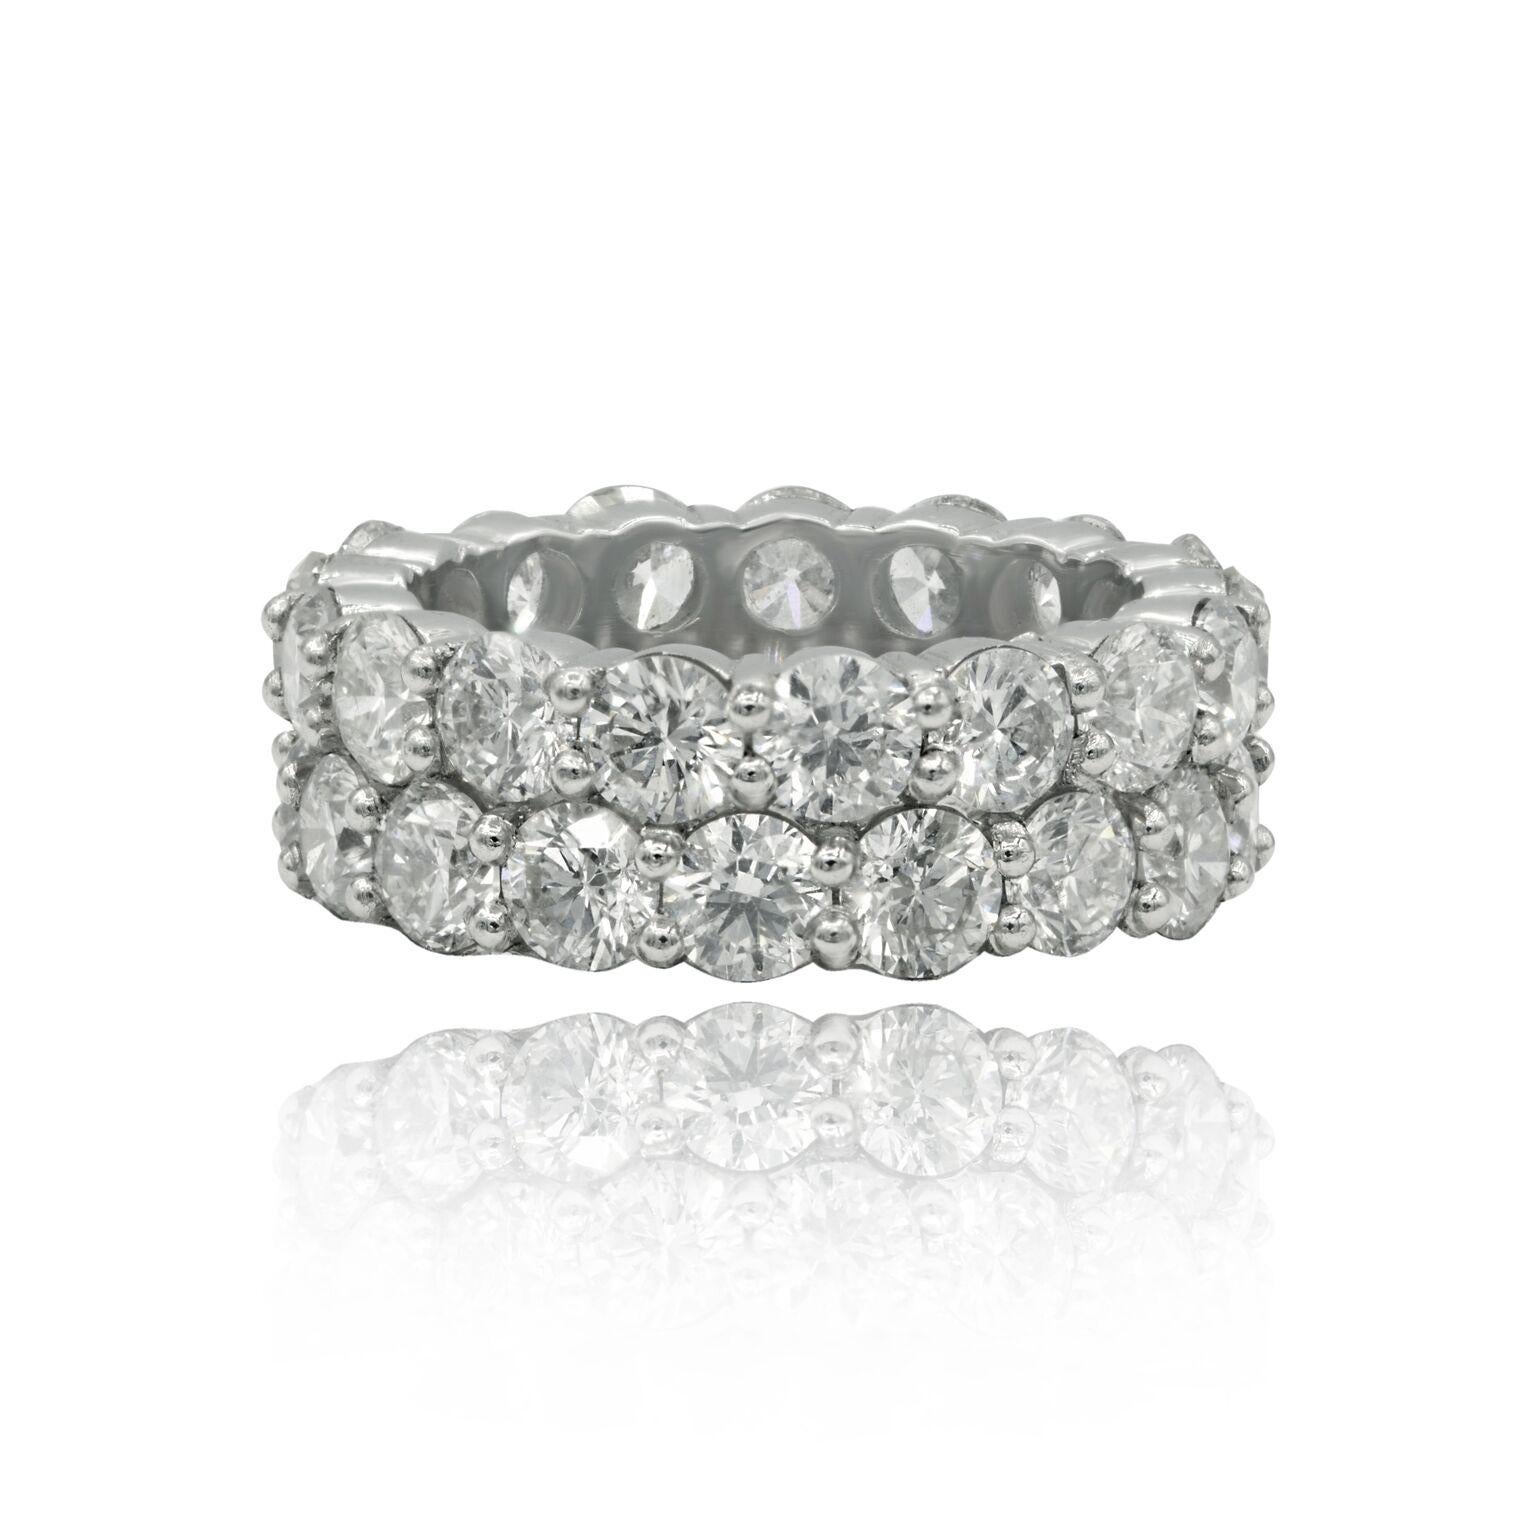 Platinum two row diamond etarnity band features 11.71 crt  of round brilliant cut diamonds.
Diana M. is a leading supplier of top-quality fine jewelry for over 35 years.
Diana M is one-stop shop for all your jewelry shopping, carrying line of